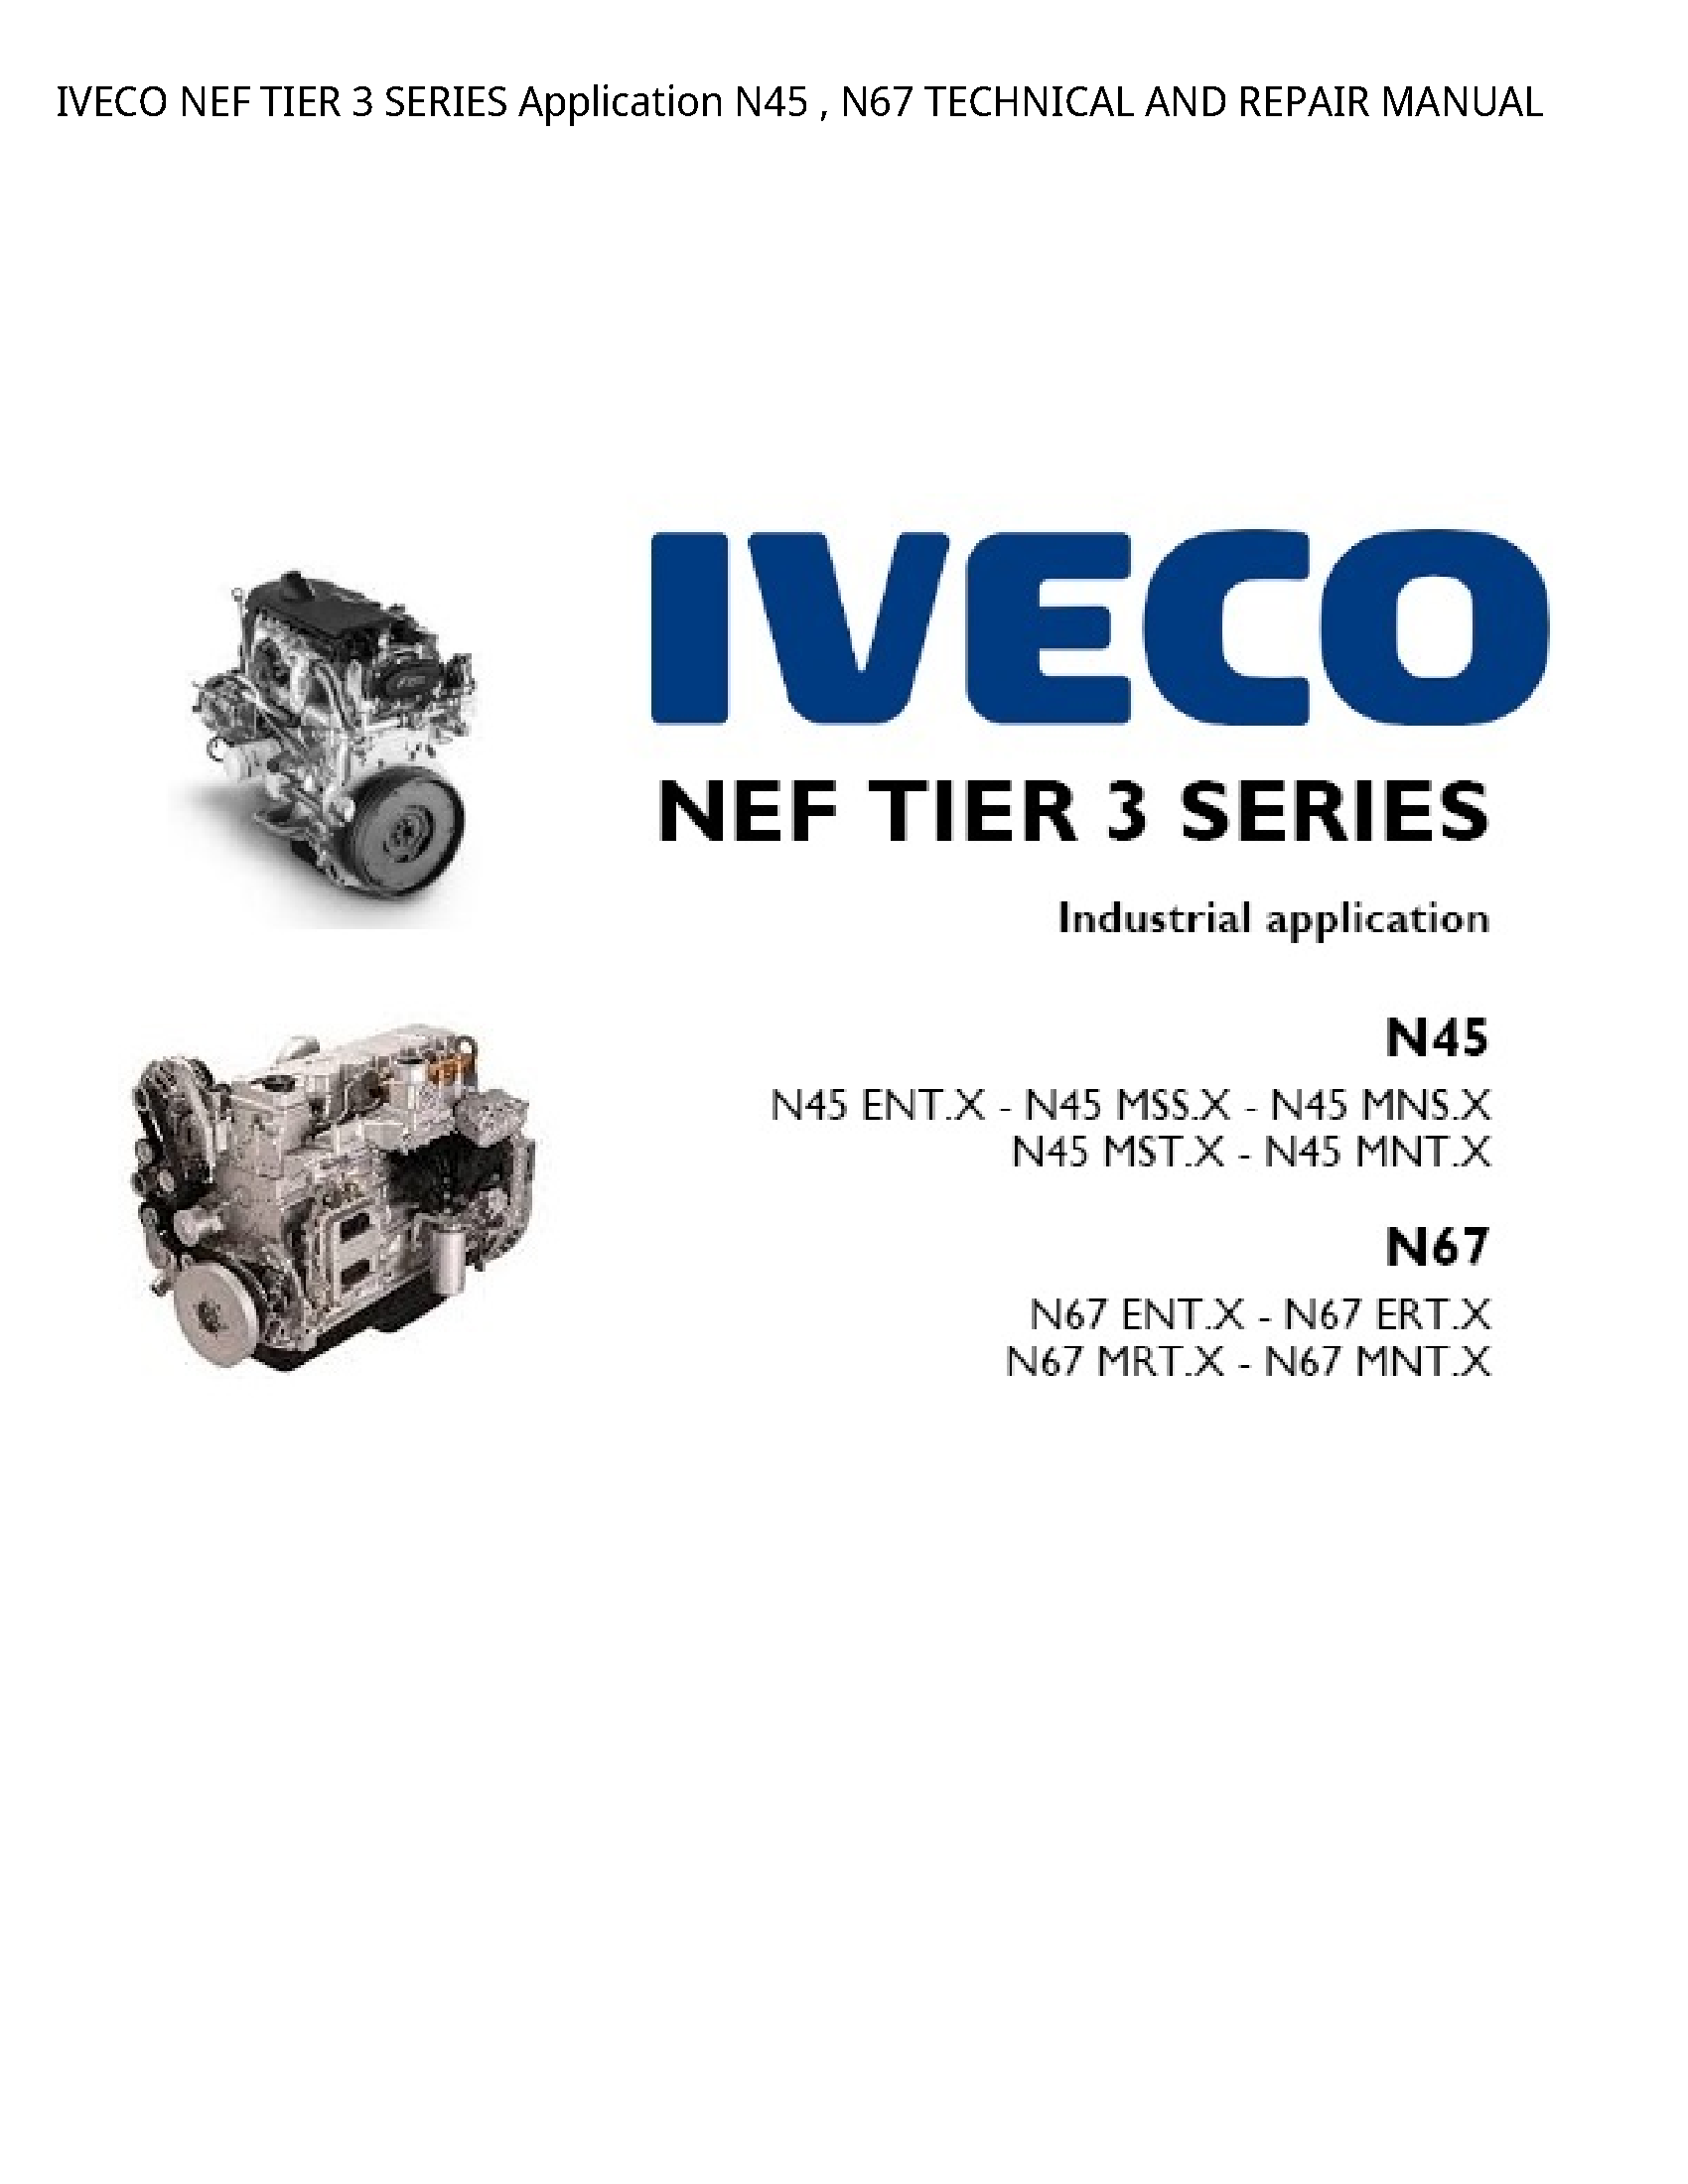 Iveco 3 NEF TIER SERIES Application TECHNICAL AND REPAIR manual